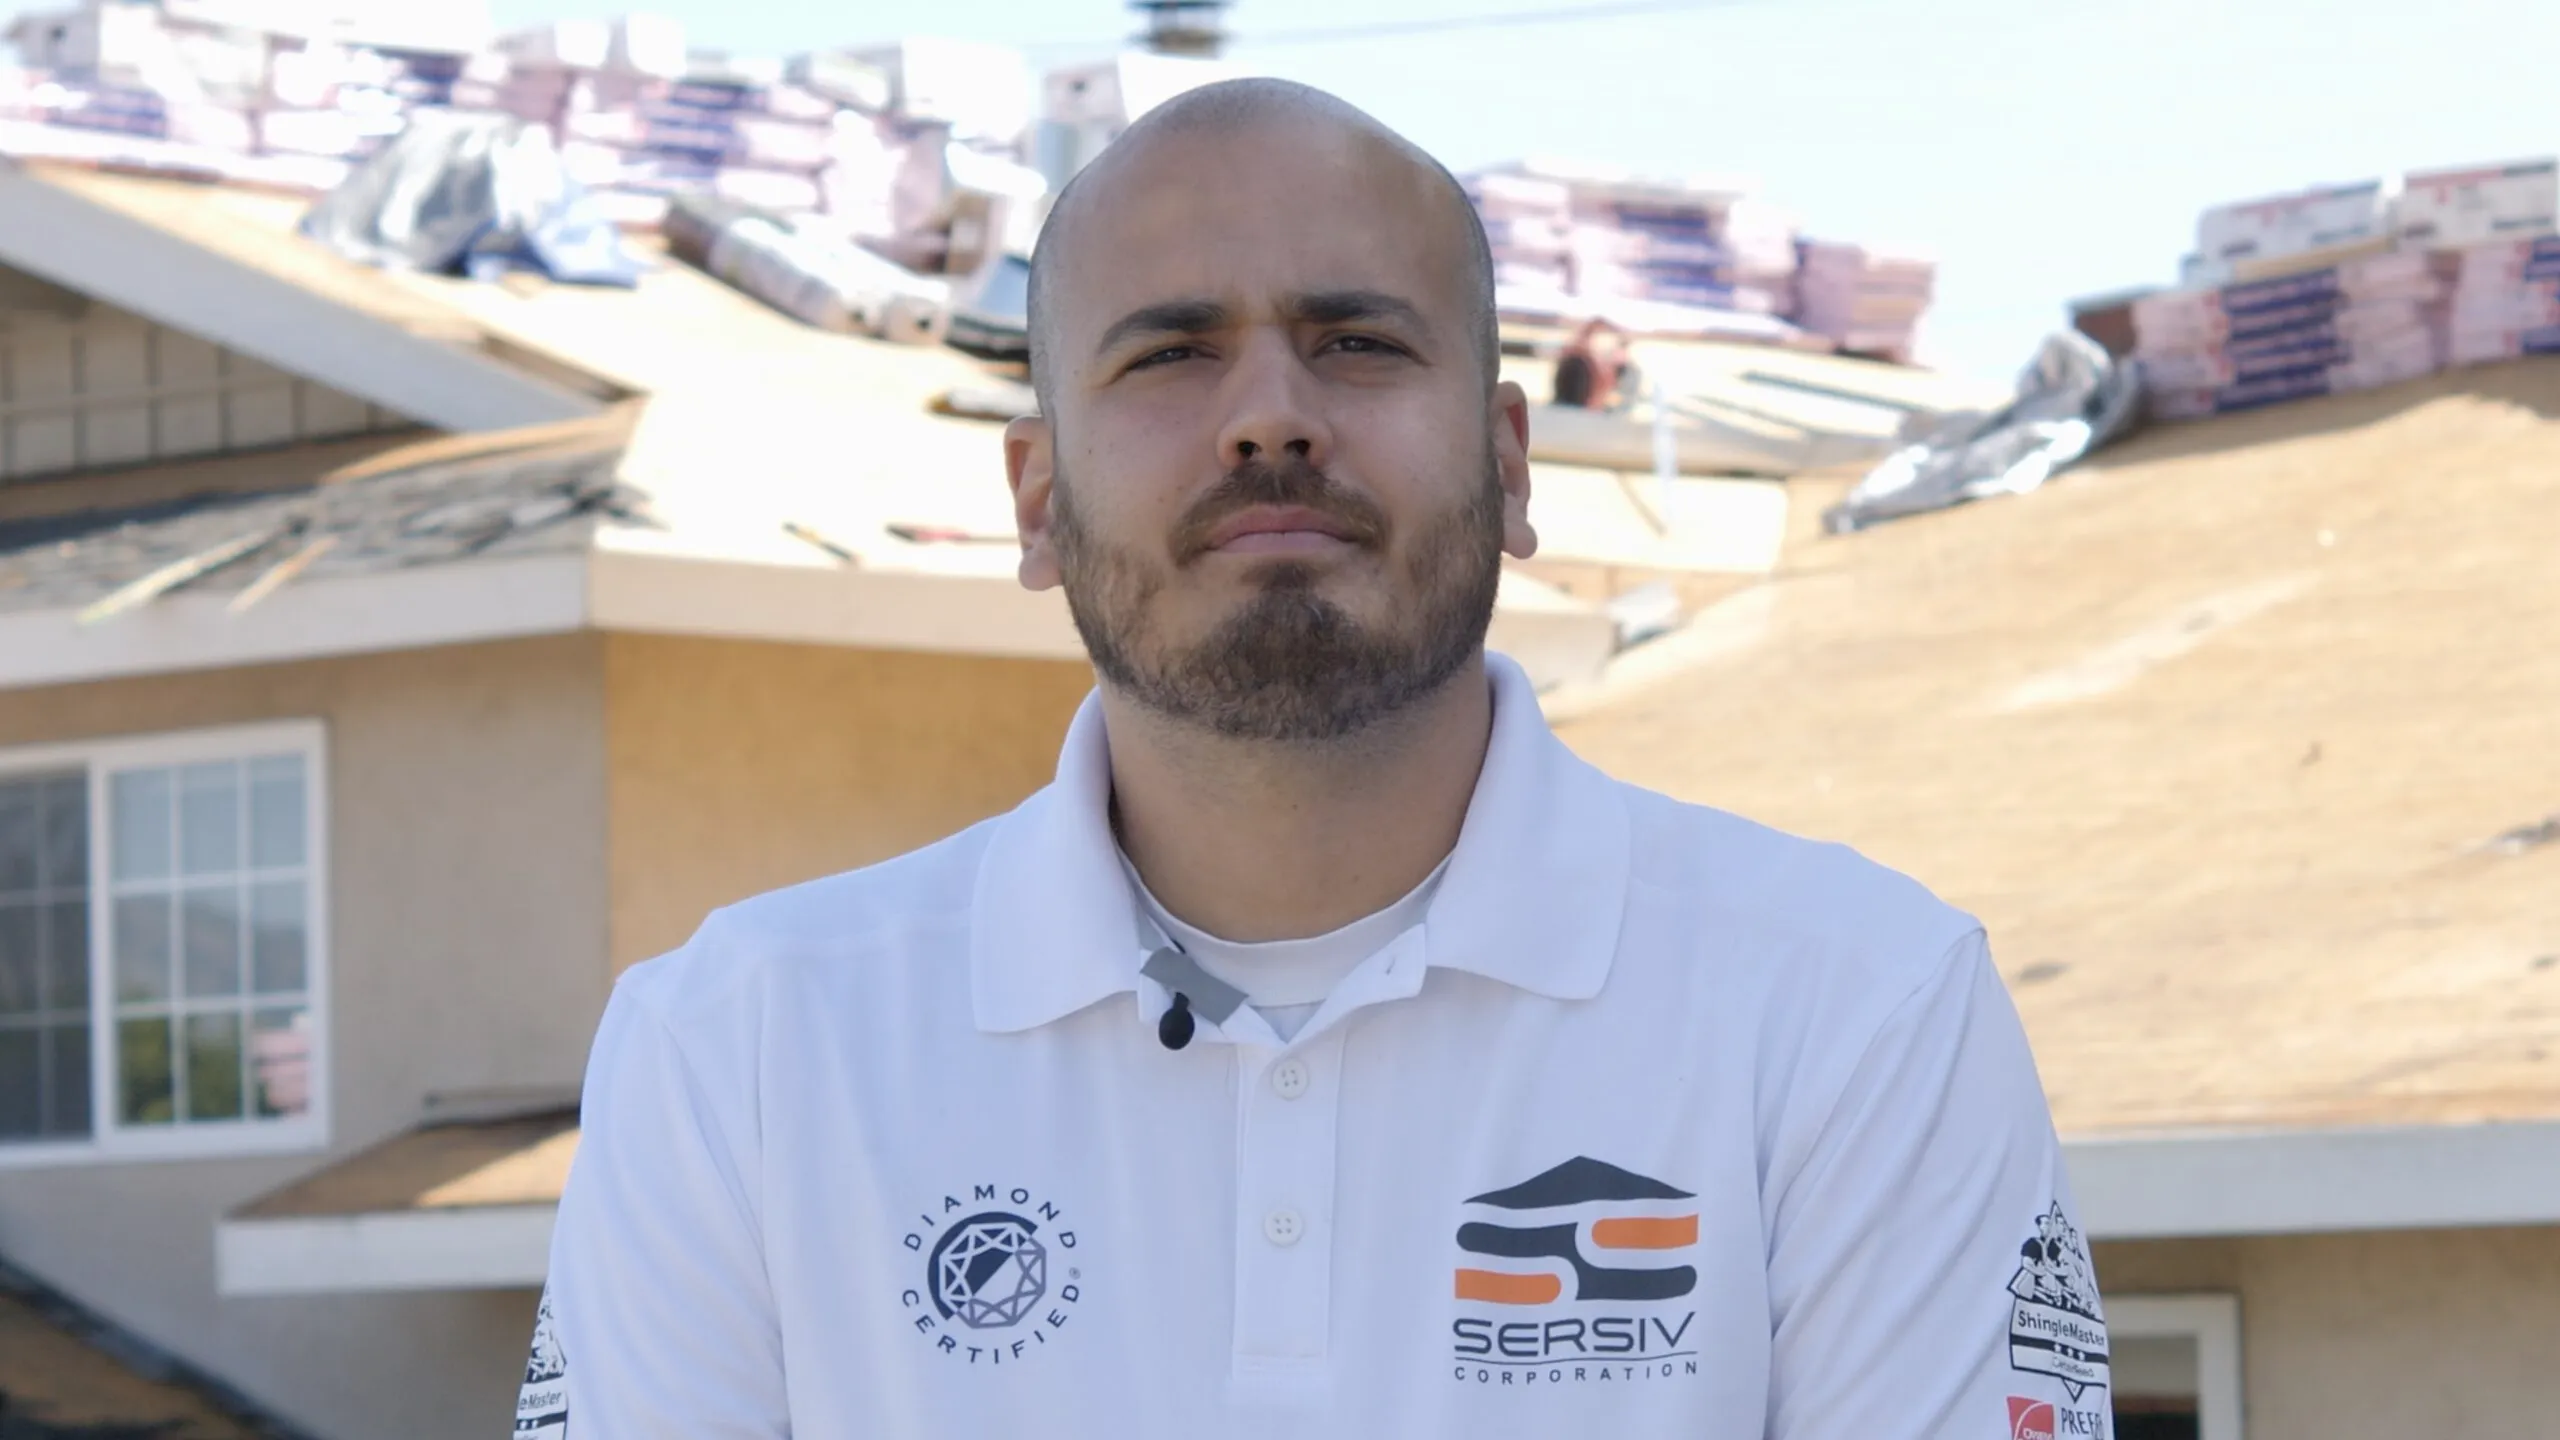 Andres Serva is owner of Sersiv Roofing Corporation, a Diamond Certified company. He can be reached at (831) 706-2045 or by email.